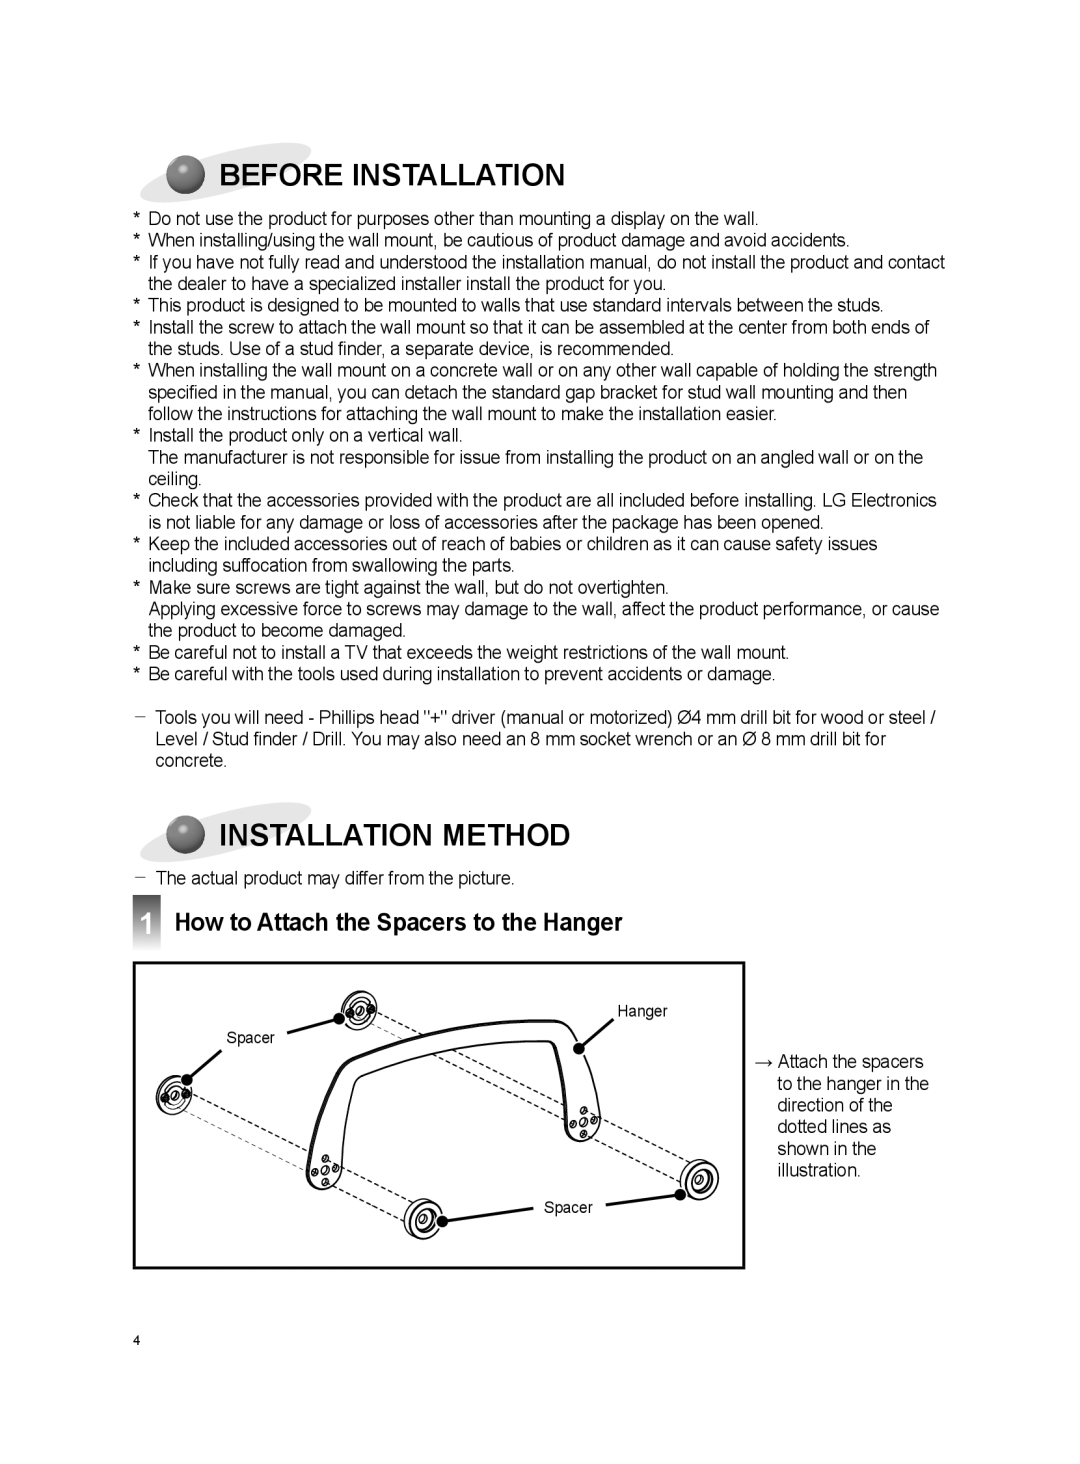 LG Electronics OSW100 install manual Before Installation, Installation Method, How to Attach the Spacers to the Hanger 